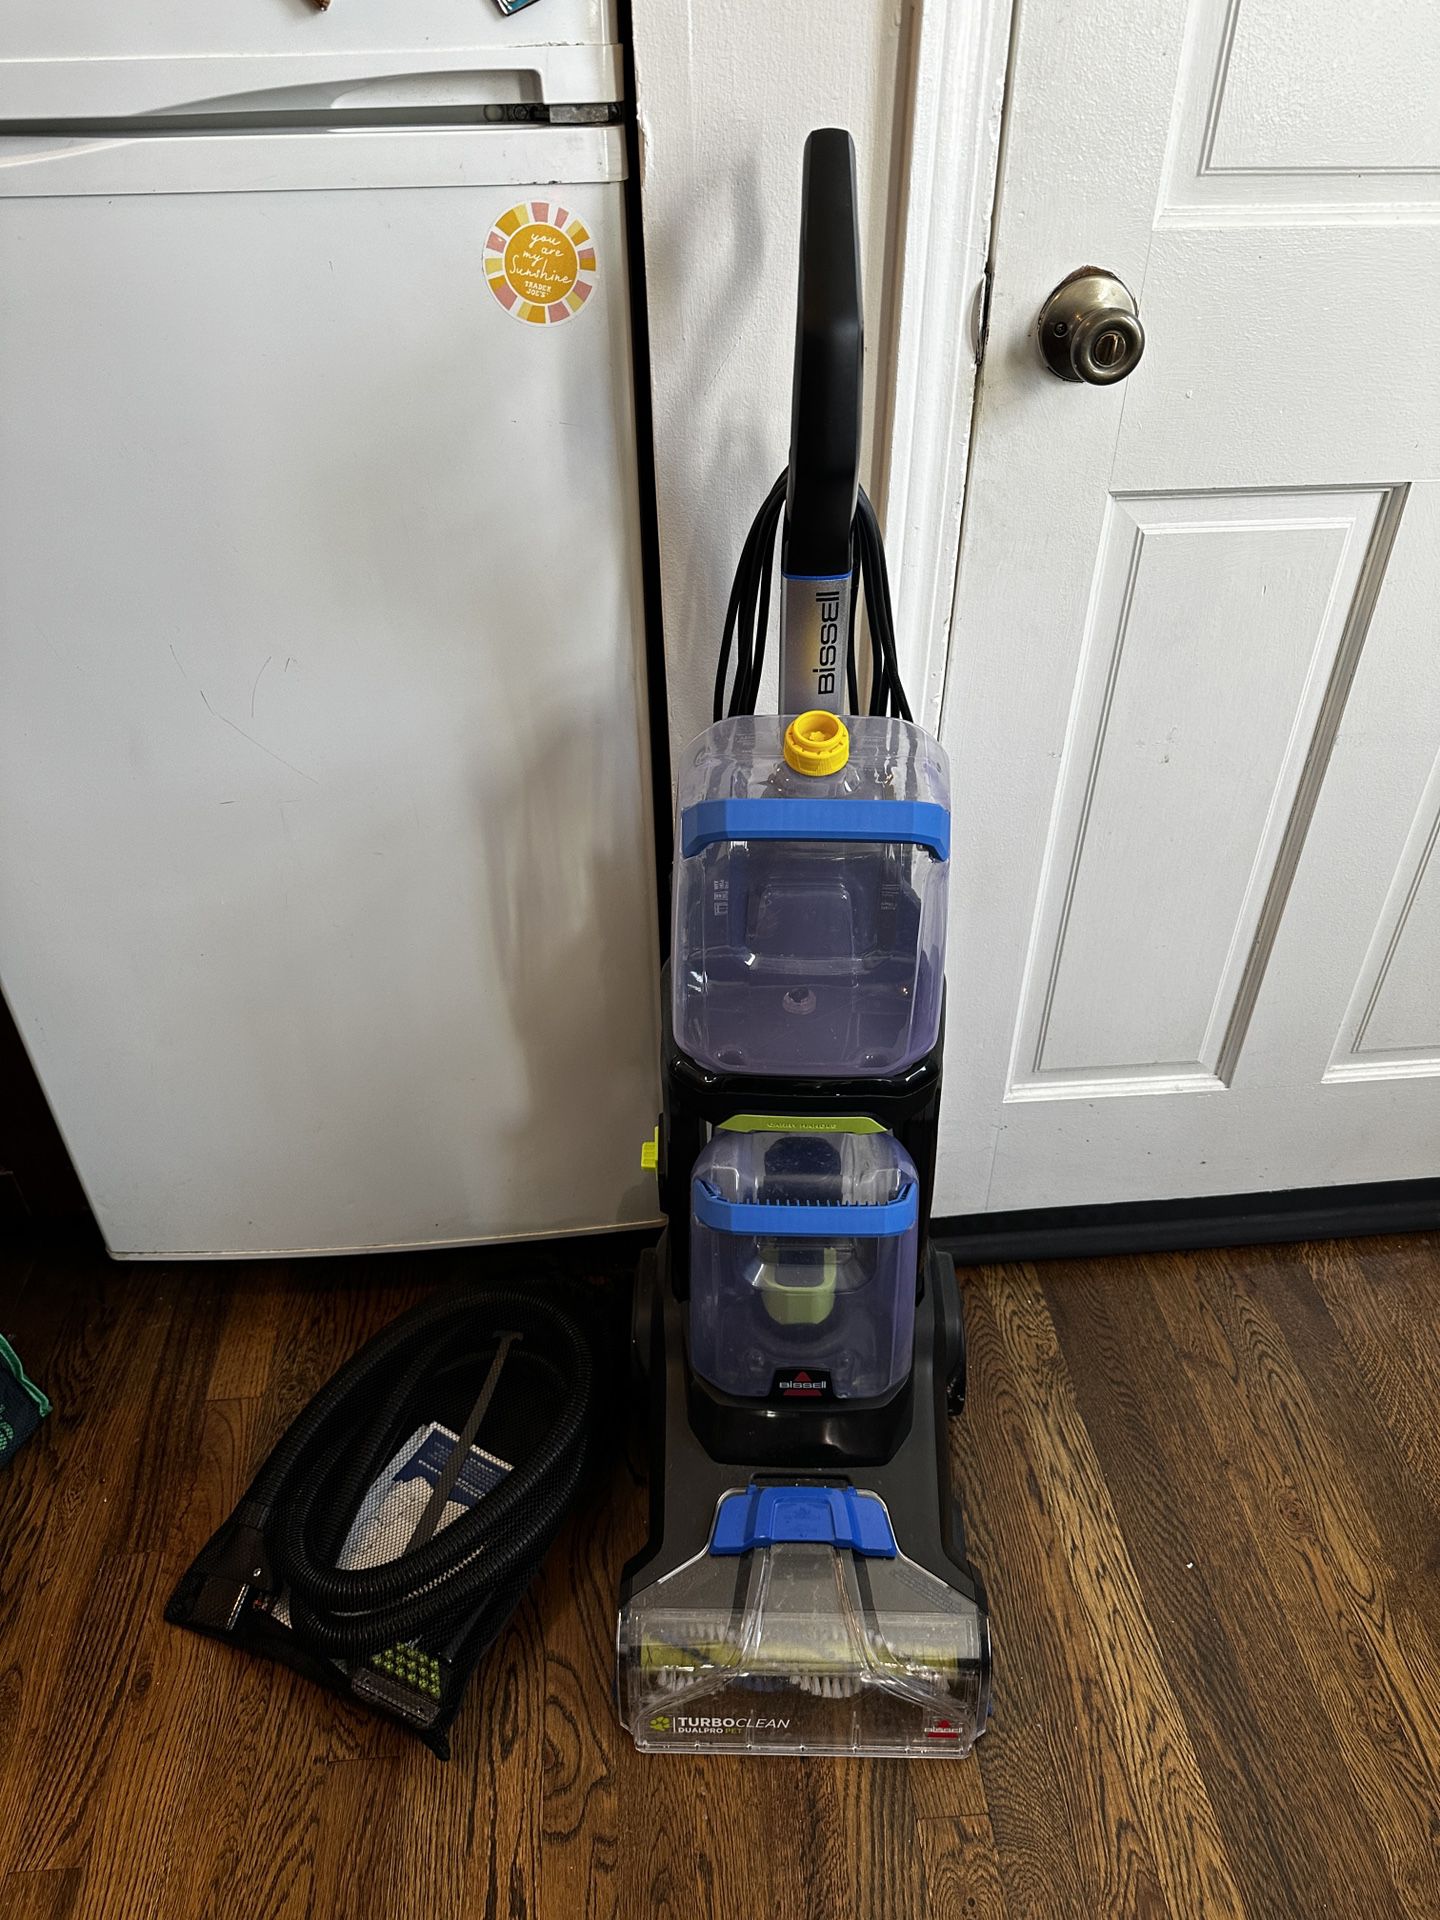 BISSELL® TurboClean™ DualPro Pet Carpet Cleaner